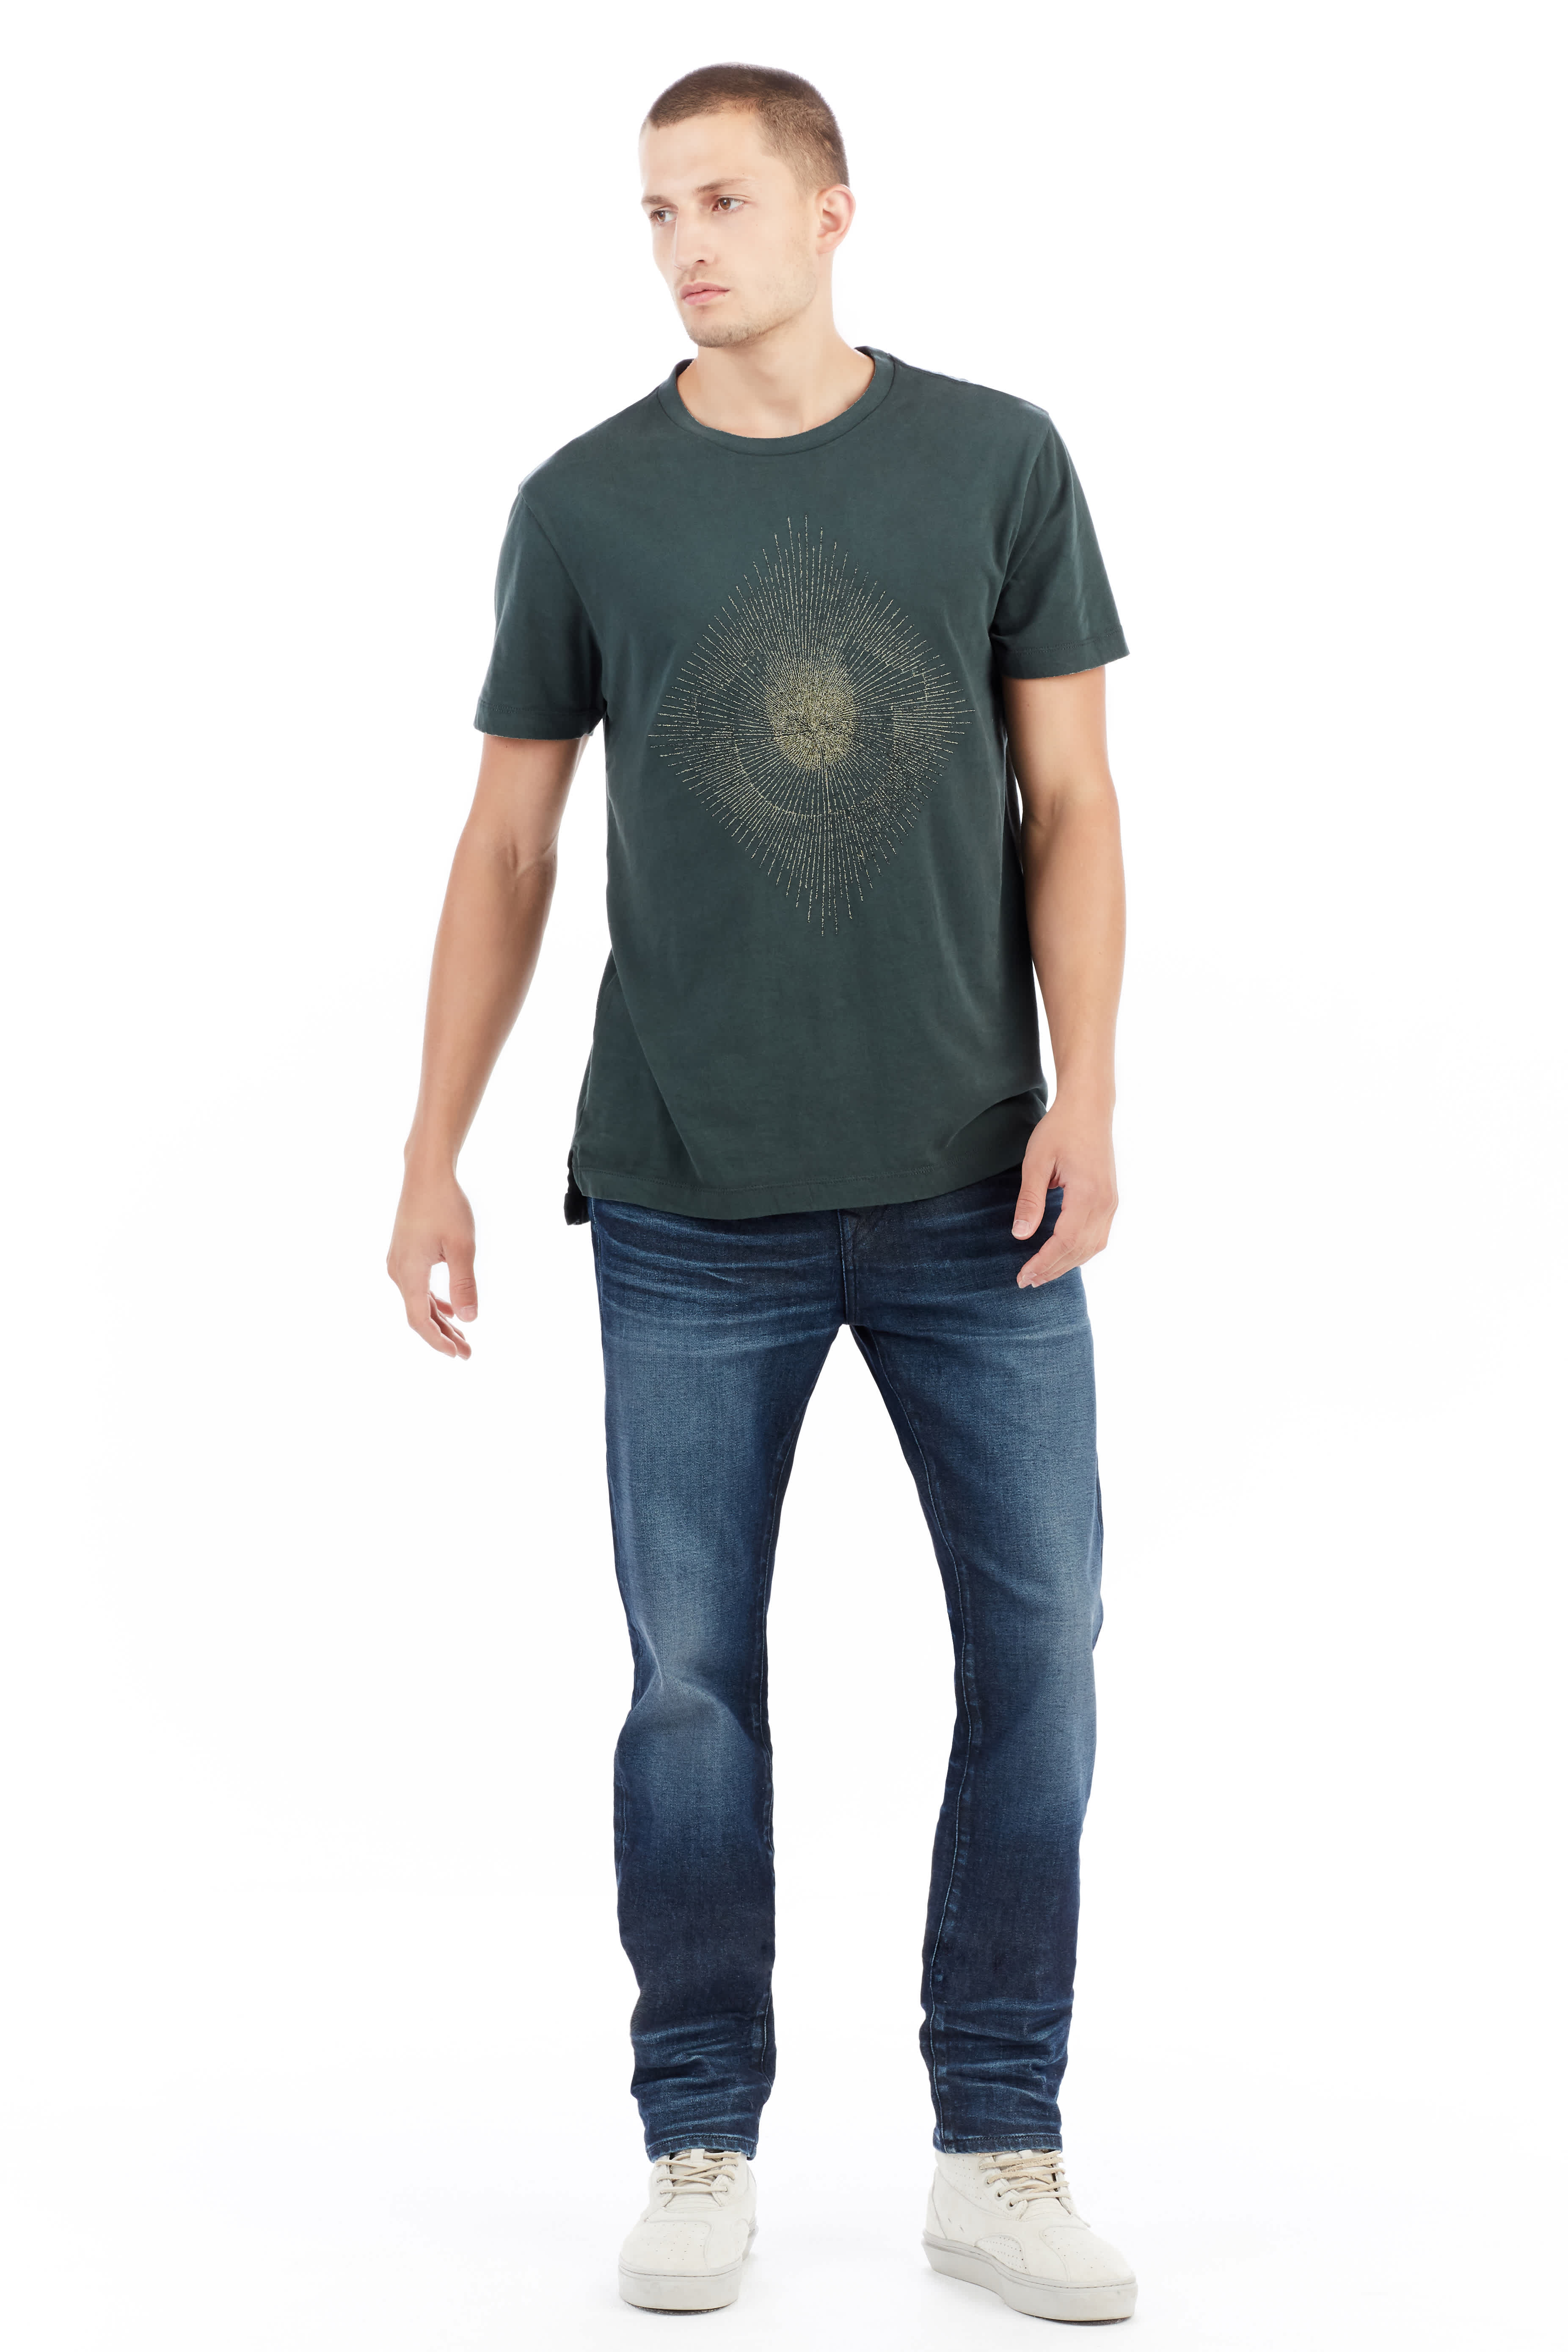 METALLIC EMBROIDERED STRING MENS CREW TEE